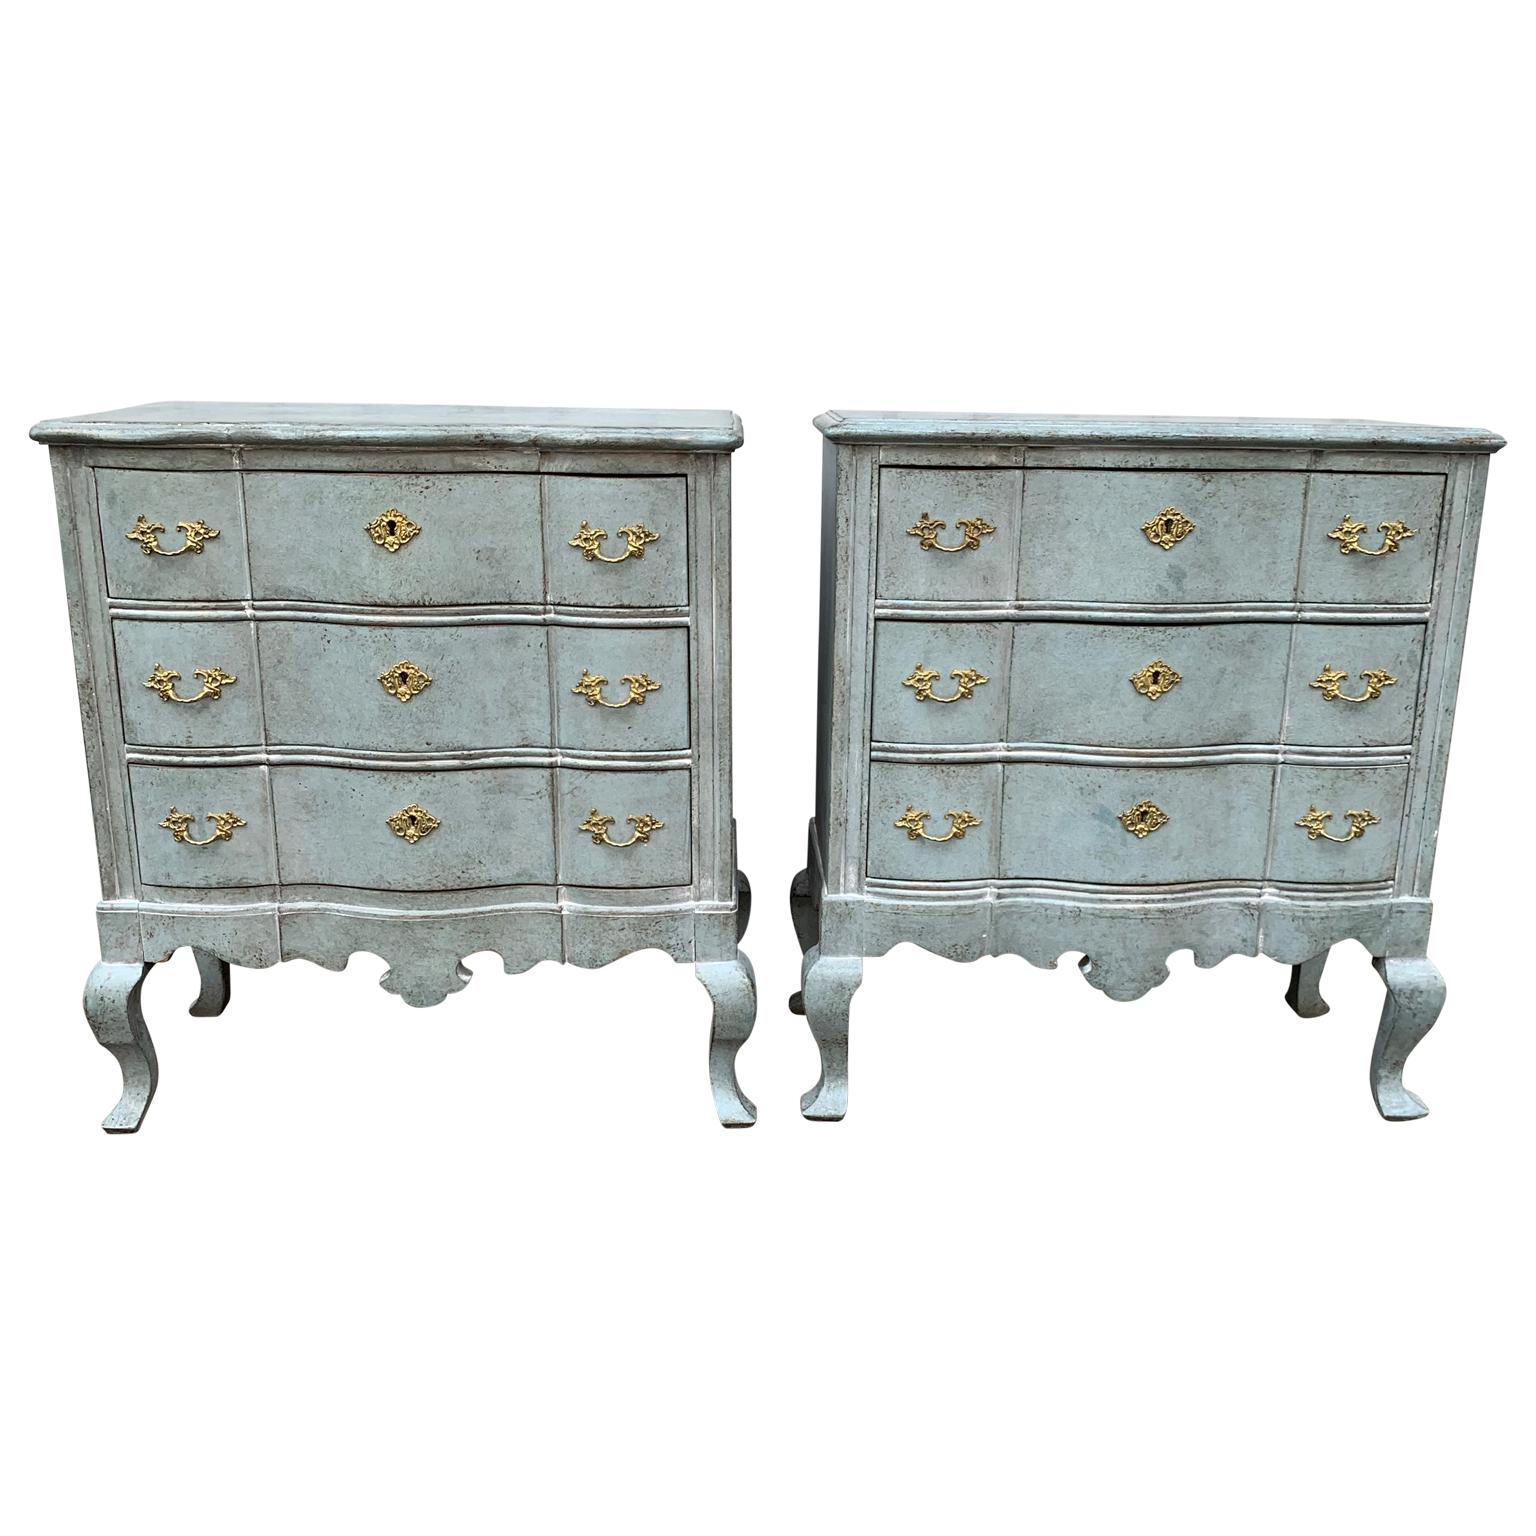 Pair of blue Gustavian style painted Rococo style chests of drawers.

EUR 175 delivery to most areas of London UK, The Netherlands, Belgium, Denmark, Sweden and Northern Germany.